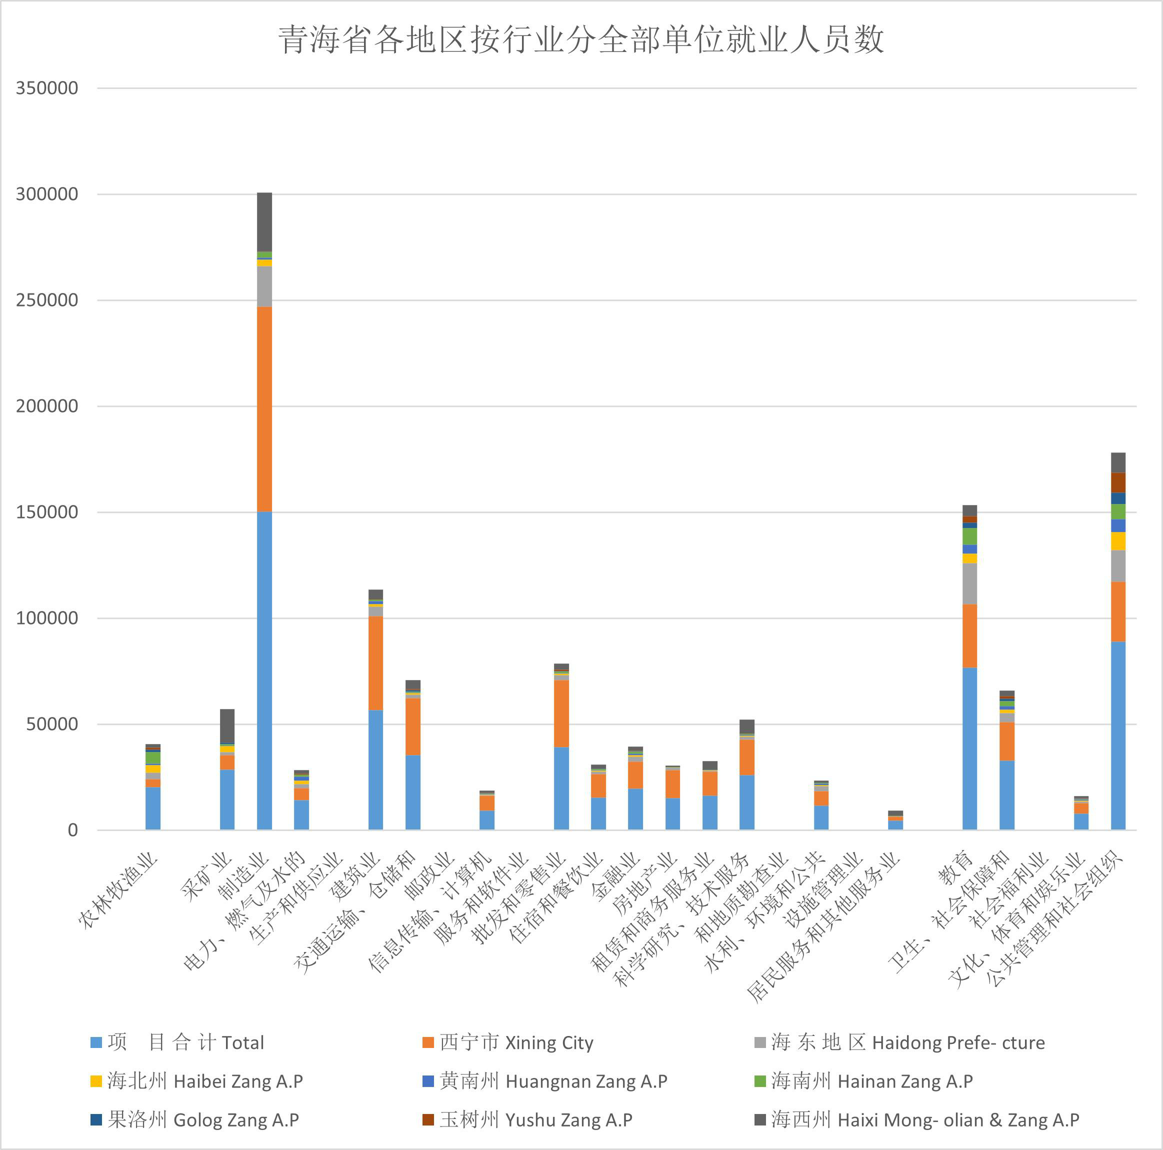 Total number of employed persons by industry in Qinghai Province (2009-2010)